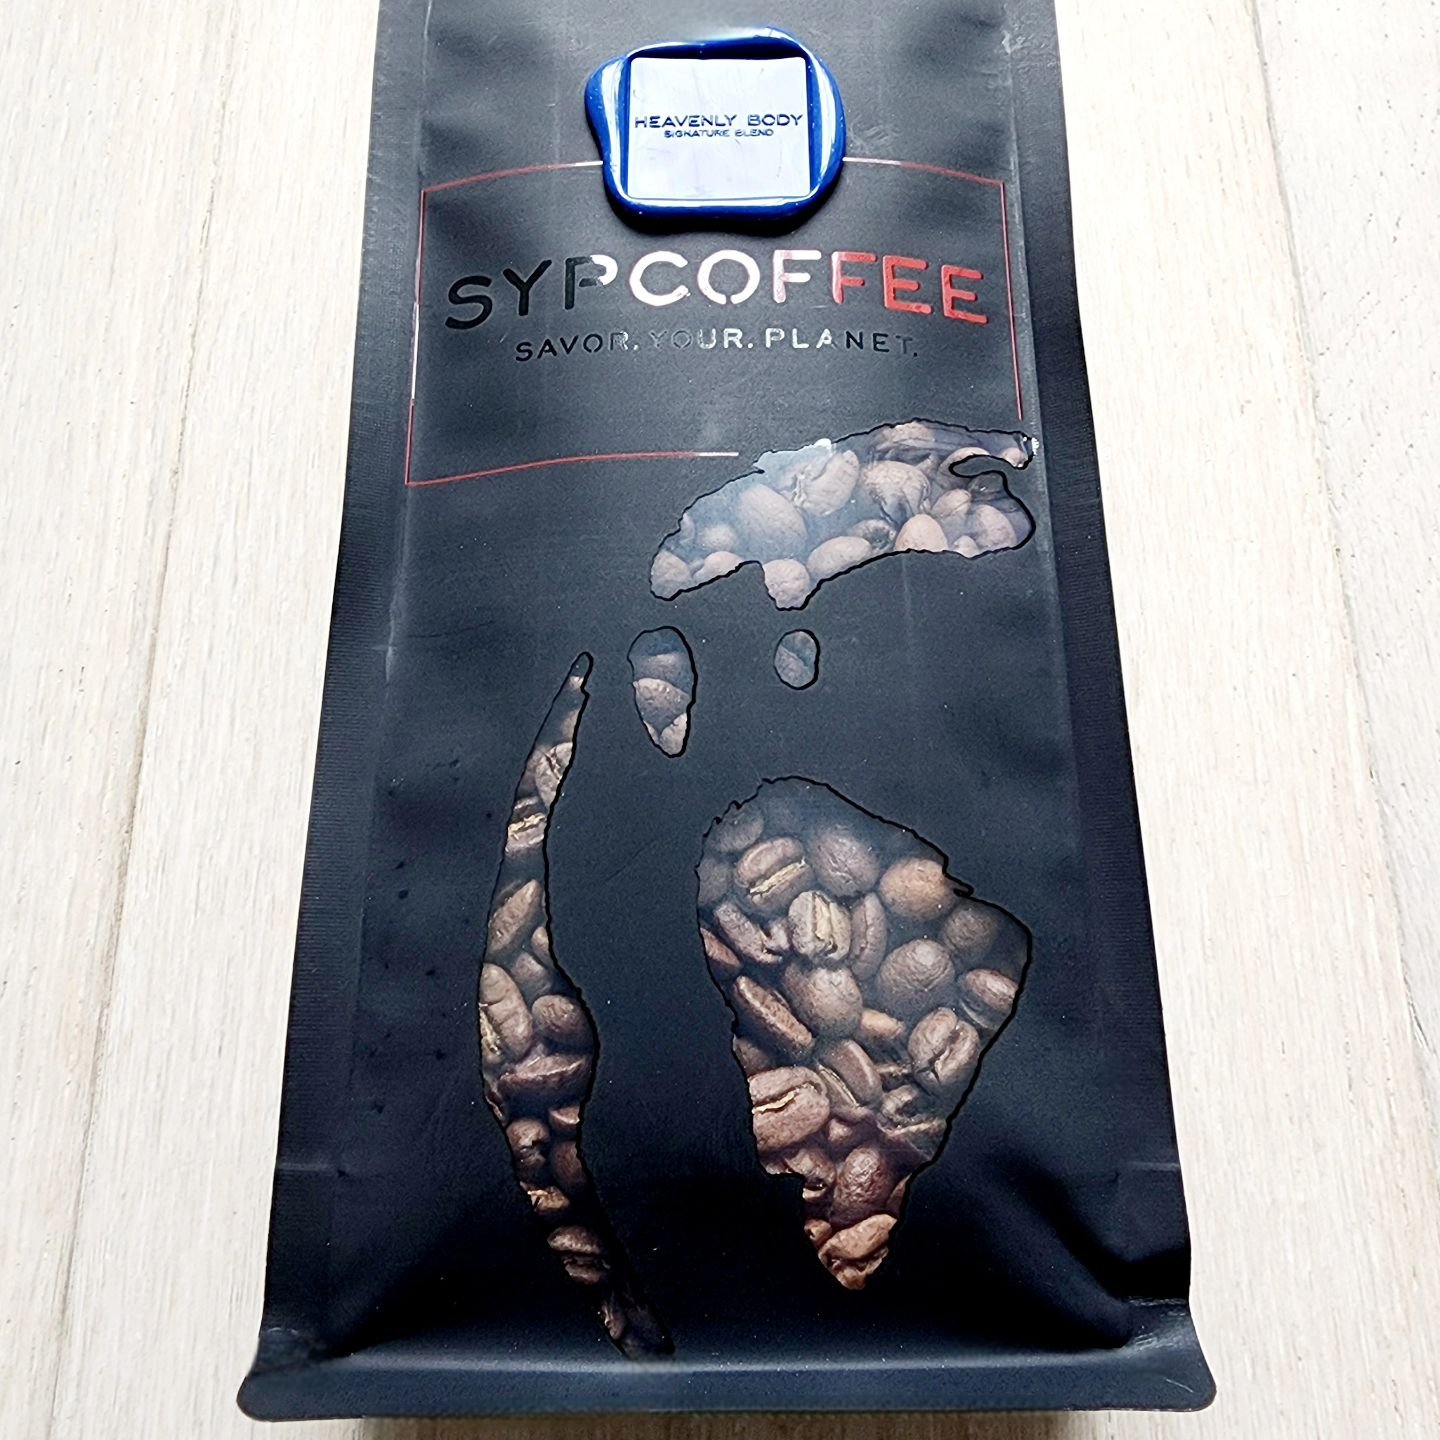 Close your 👀 and think about the last incredible ☕️ you enjoyed. The flavors. The rich, velvety mouth feel. The smoothness. The anticipation for the next brew.
.
Was it this?
.
Heavenly Body 2024 is here and roasted just for you.
.
SYPCOFFEE.com.
Sa